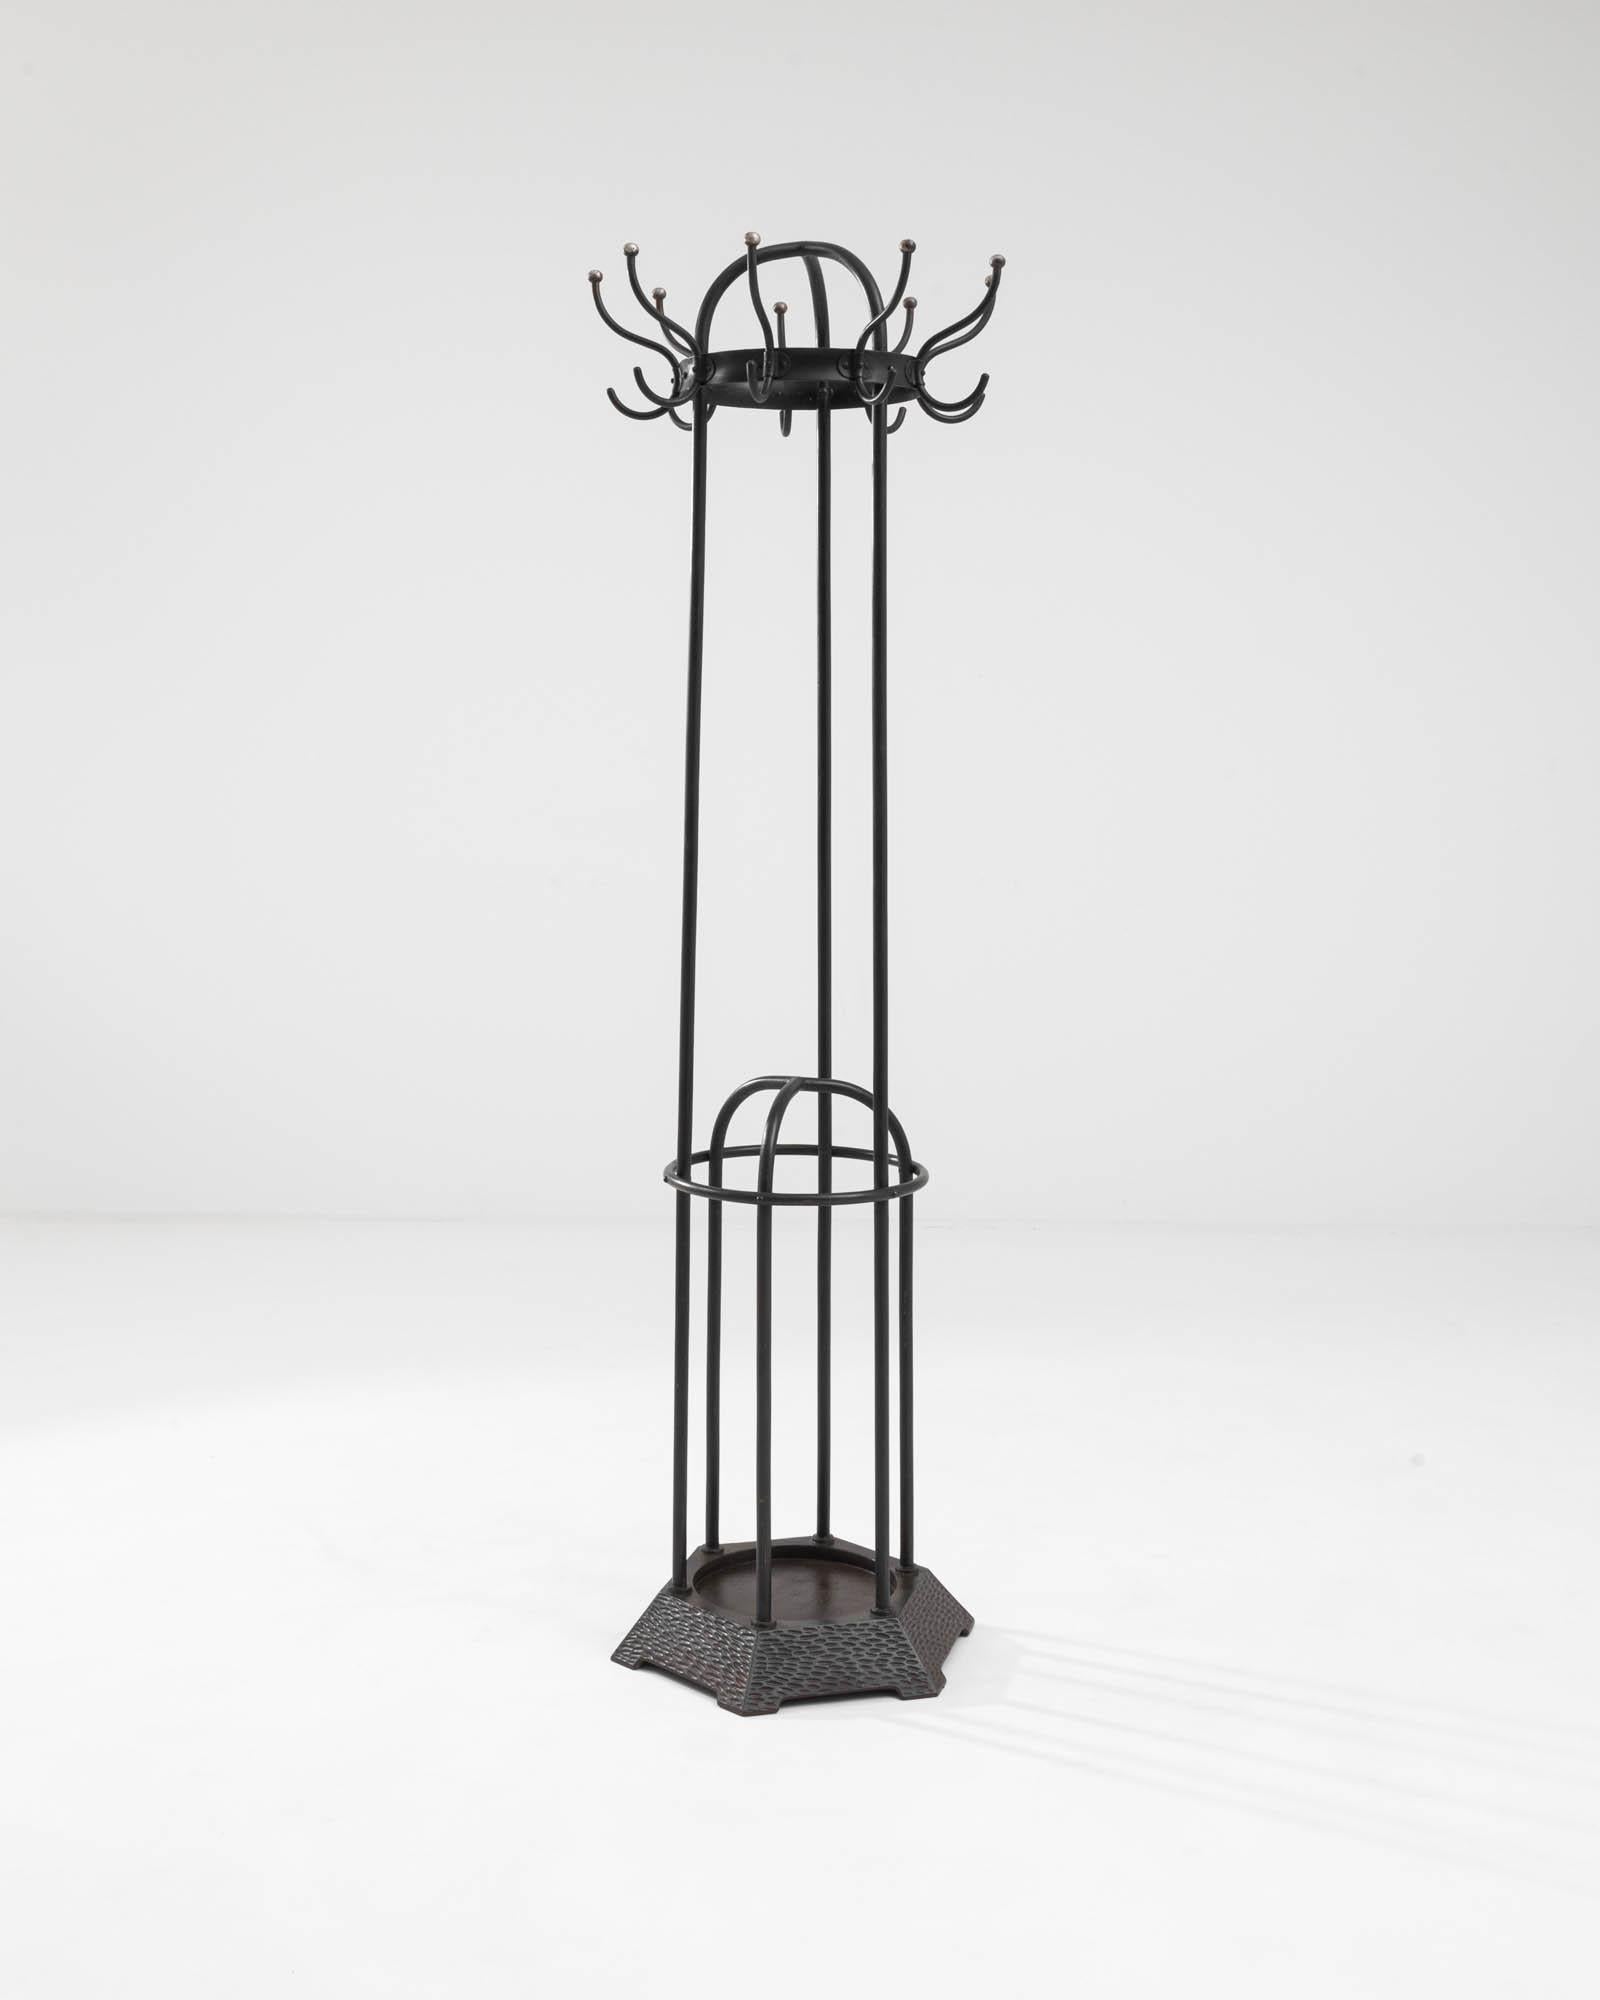 A metal free-standing coat hanger created in 20th century Austria. Created entirely from welded metal, this elaborate floor hanger imparts a neo-gothic style, creating a dark and brooding, yet oddly fascinating aura. Delicately bent tubes wind down